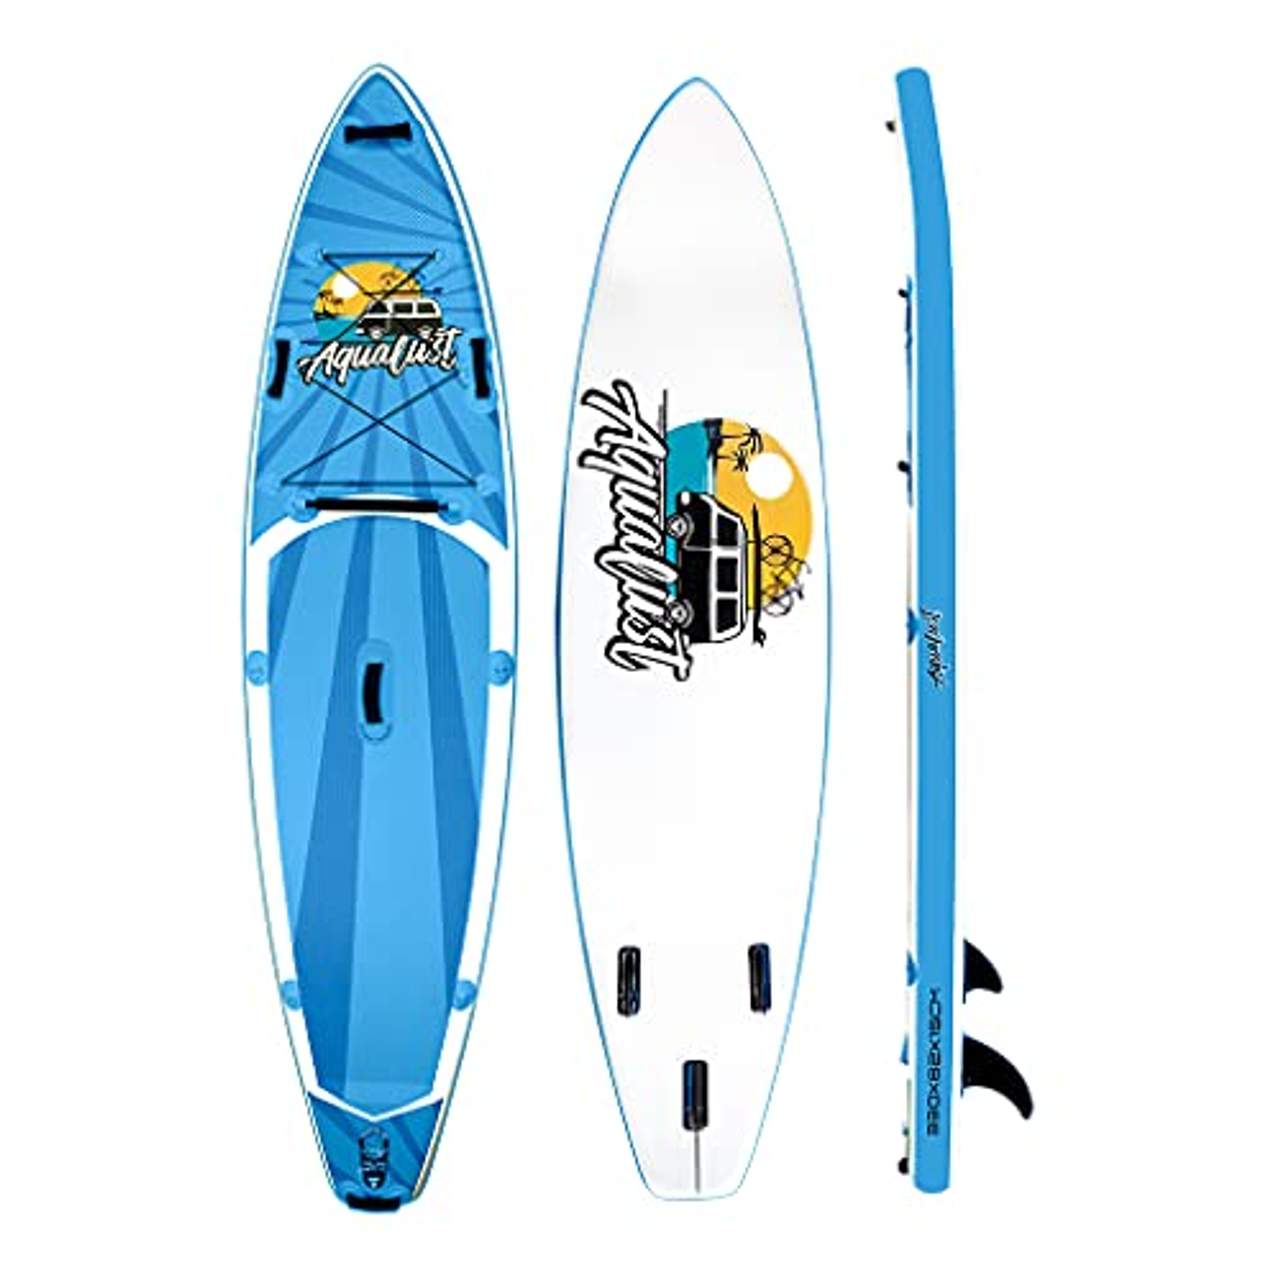 AQUALUST 10'8" Cruiser SUP Board Stand Up Paddle Isup